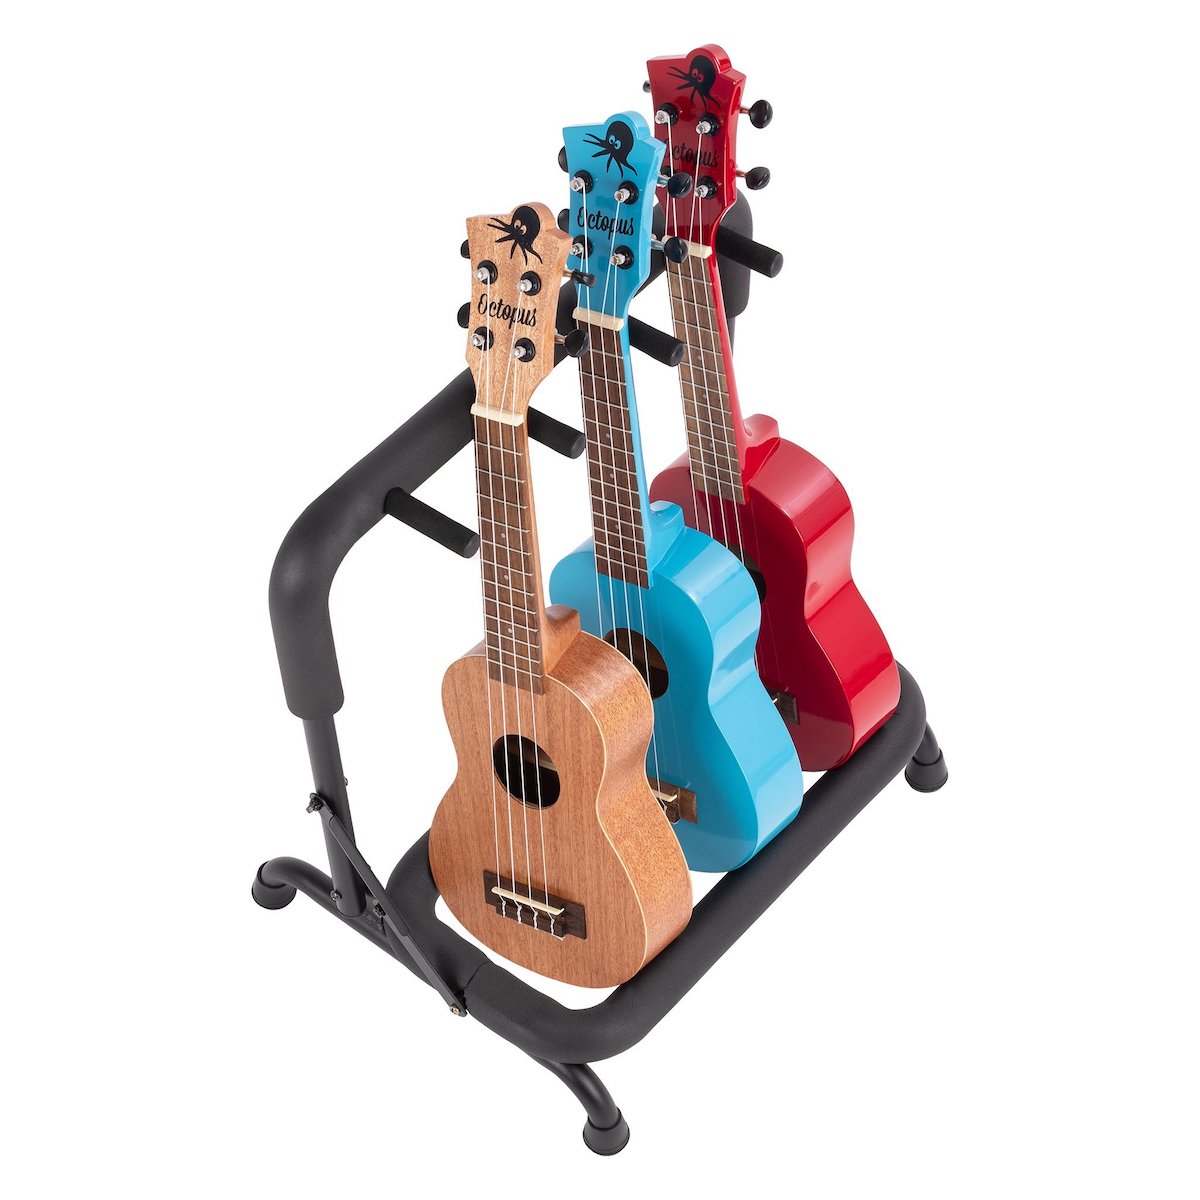 Octopus Universal Stand for Multiple Ukuleles